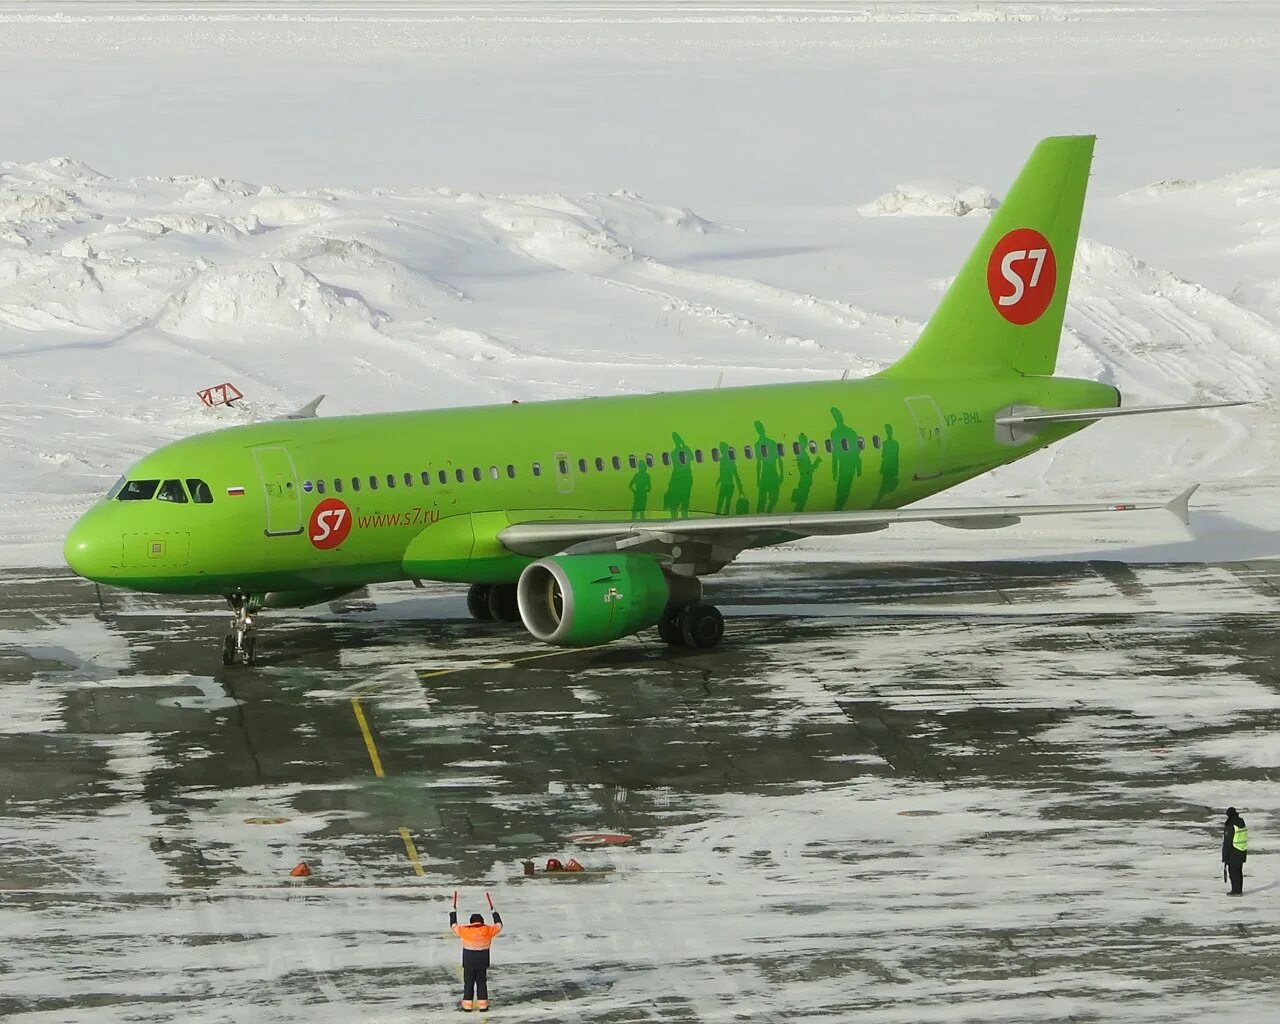 Аэробус а319 s7 Airlines. A319 s7. Airbus a-319 самолёта s7. Airbus a319 s7. Где севен